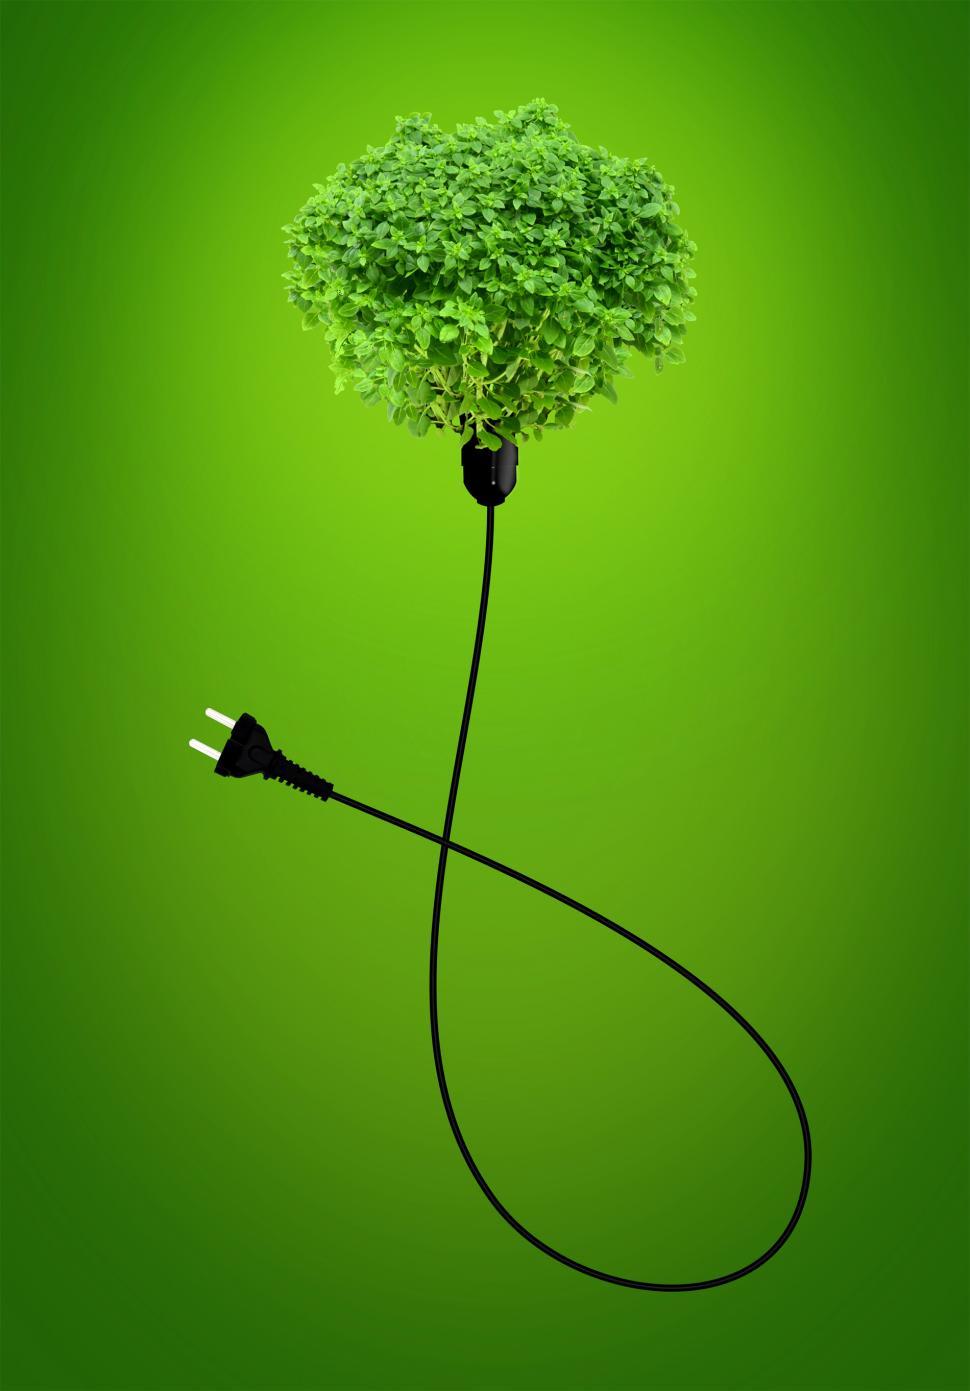 Free Image of Clean Energy Concept - A Green Power Plug 